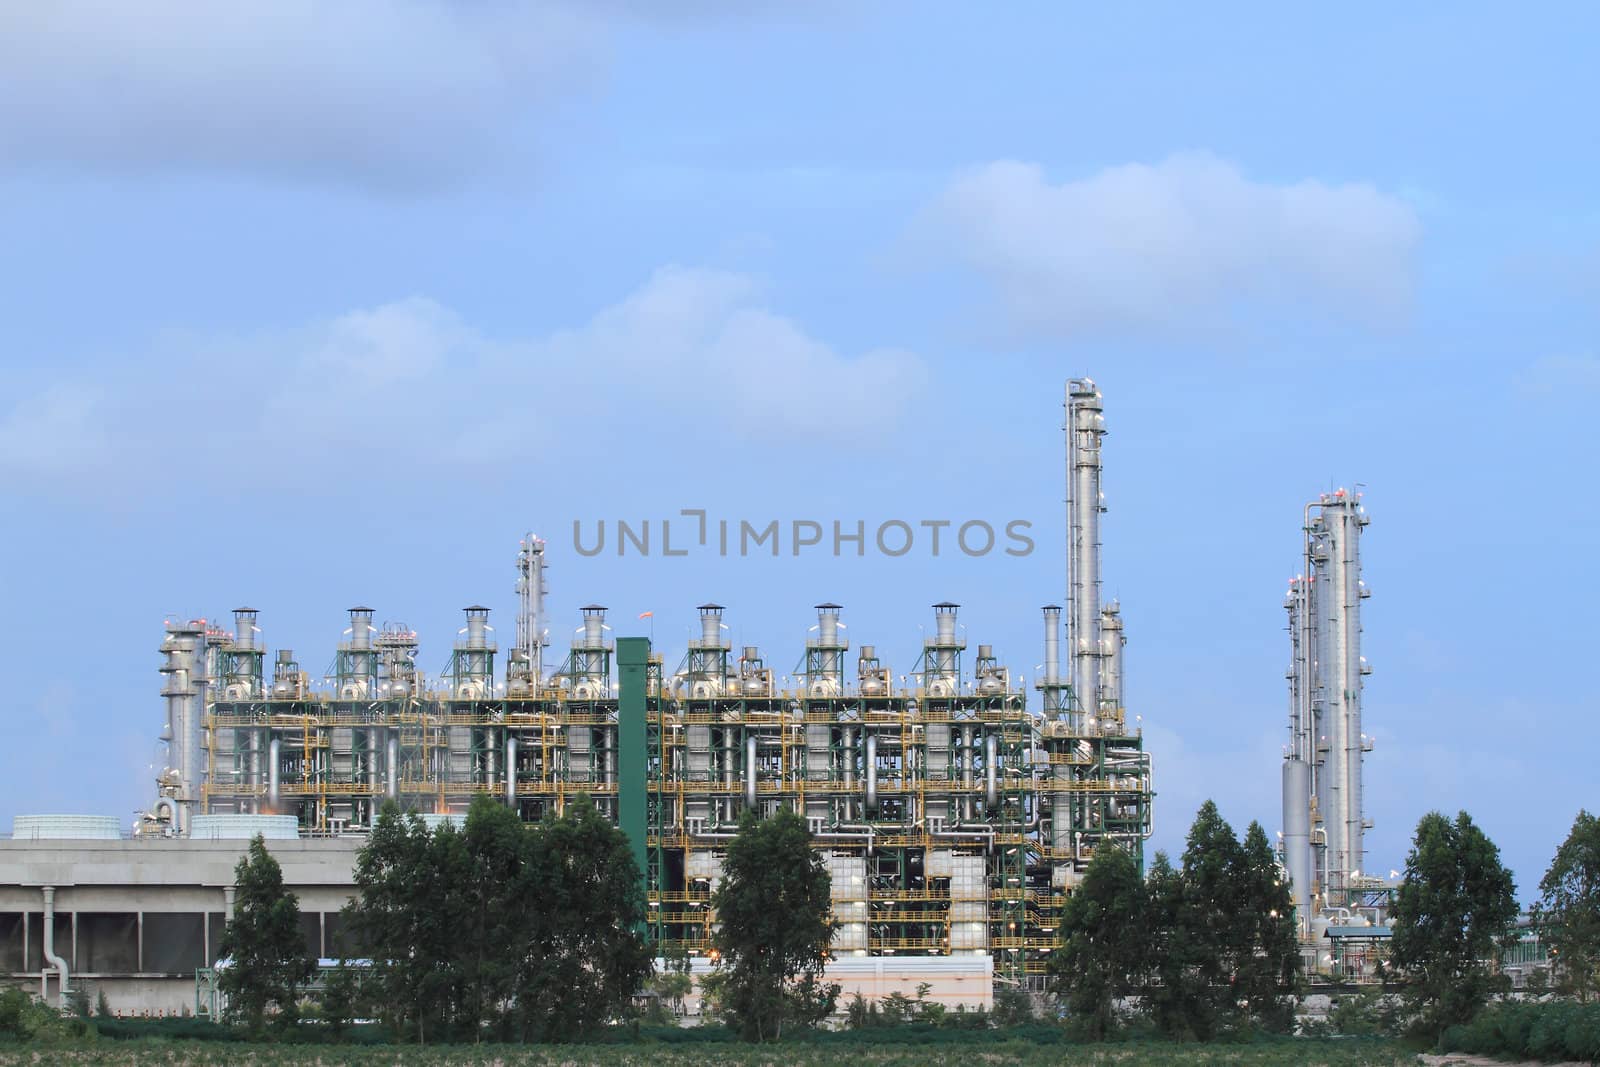 Oil refinery at twilight (Map Ta Phut Industrial Estate Rayong Thailand)